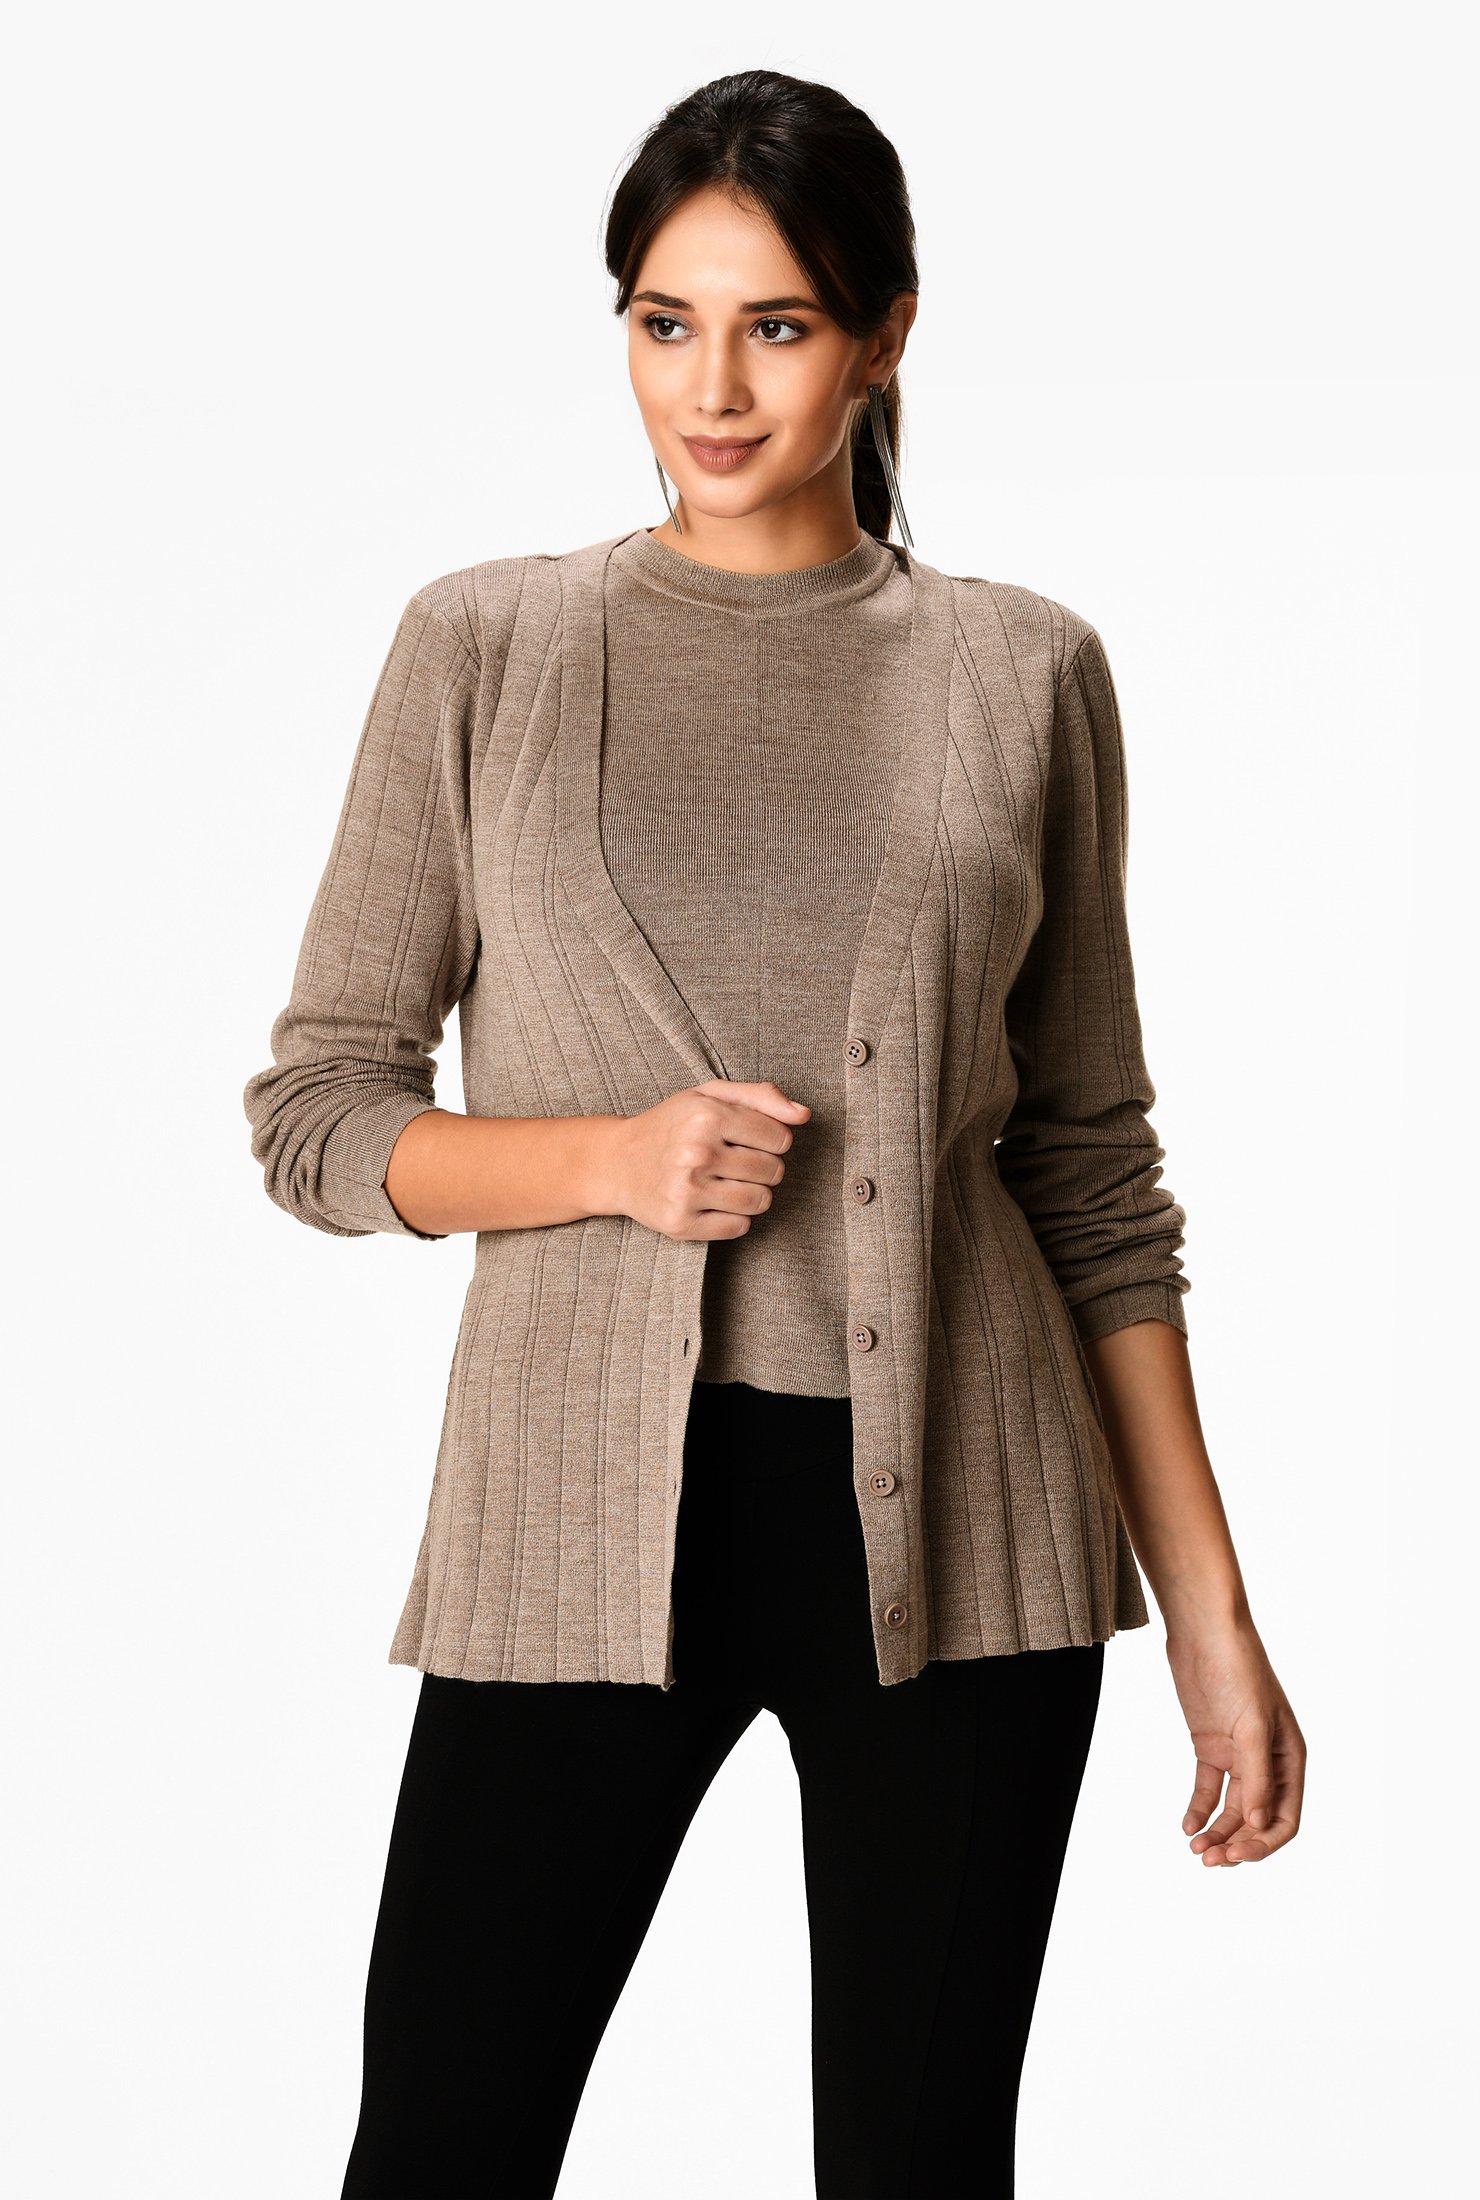 Shop Sweater tank top and button front cardigan